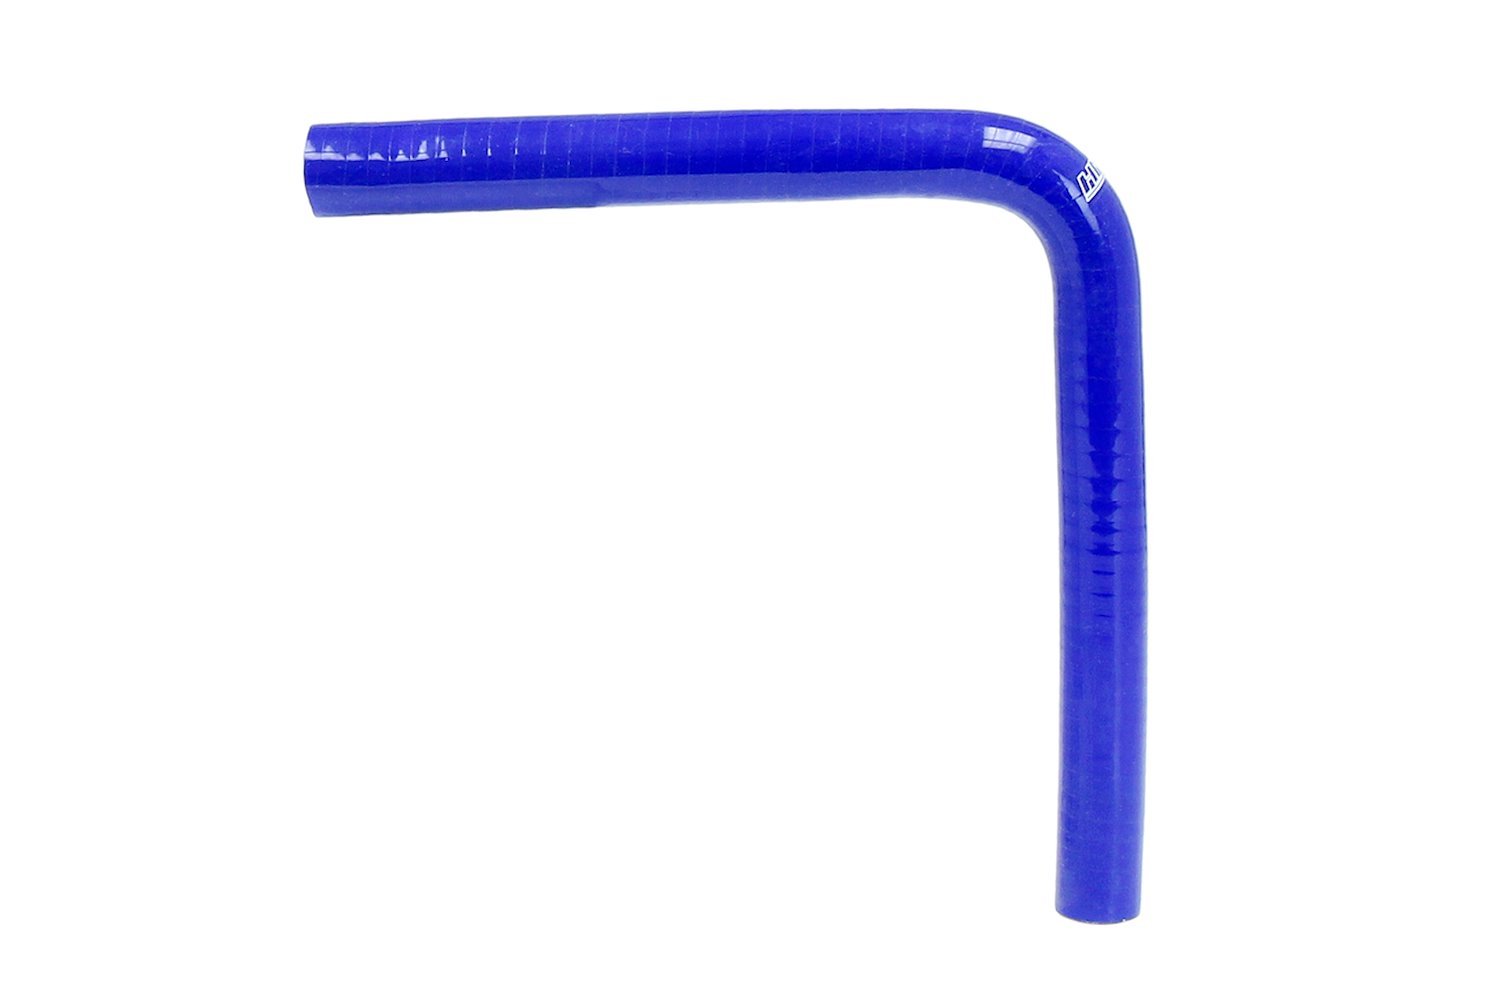 HTSEC90-138-L10-BLUE Silicone 90-Degree Elbow Hose, High-Temp 4-Ply Reinforced, 1-3/8 in. ID, 10 in. Leg, Blue